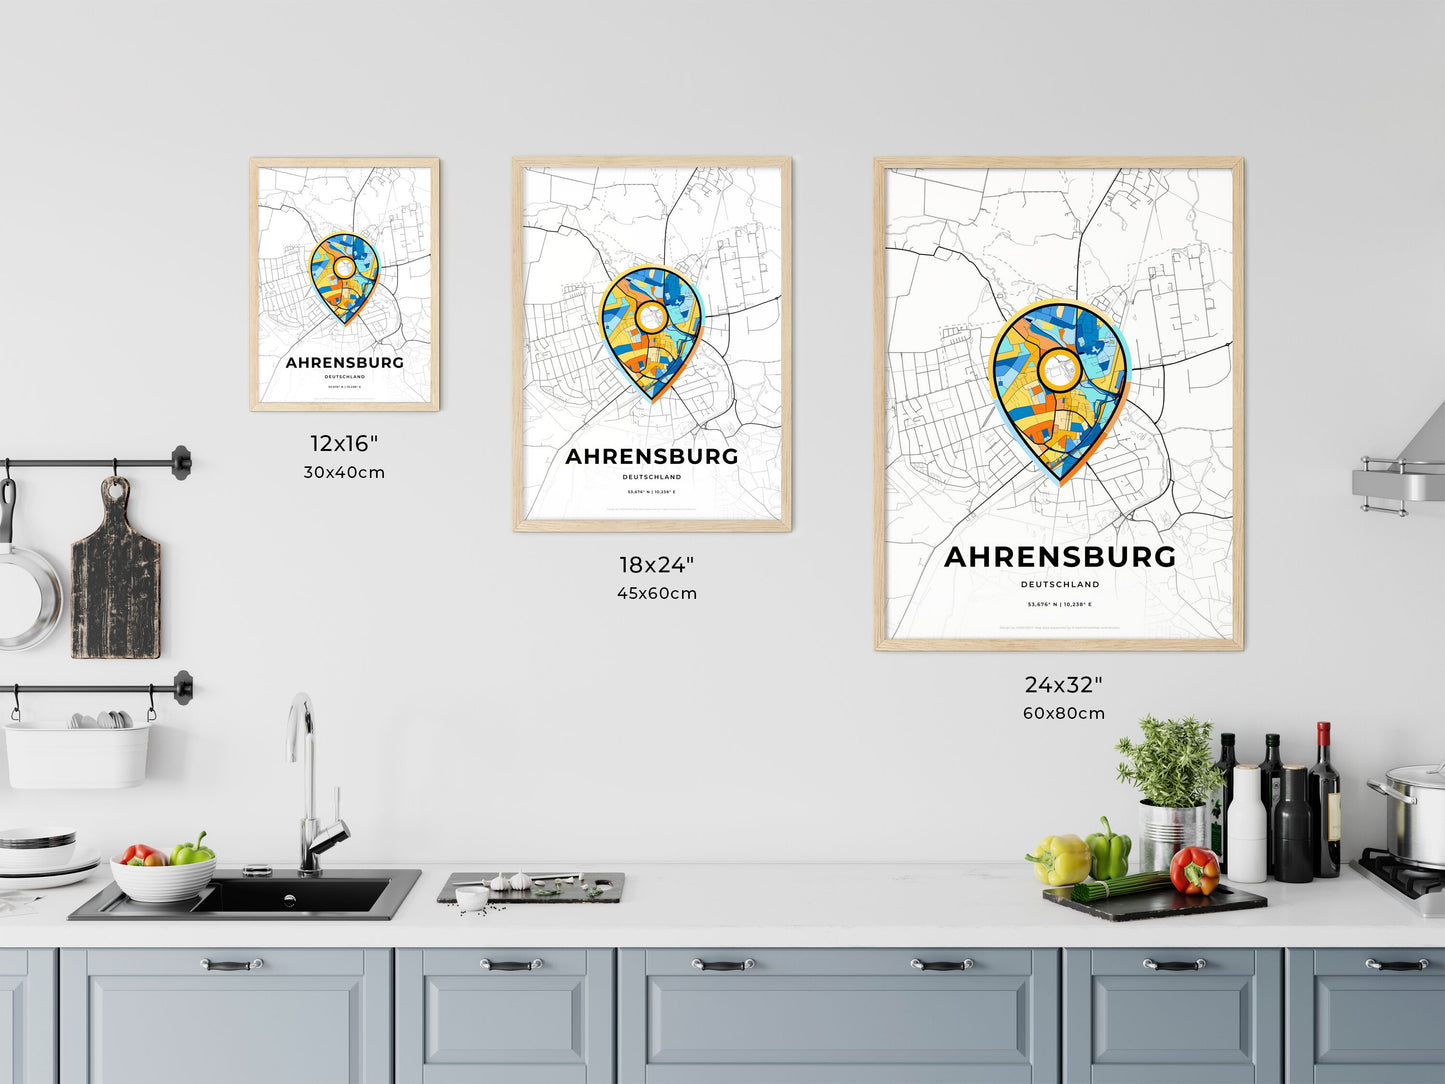 AHRENSBURG GERMANY minimal art map with a colorful icon. Where it all began, Couple map gift.